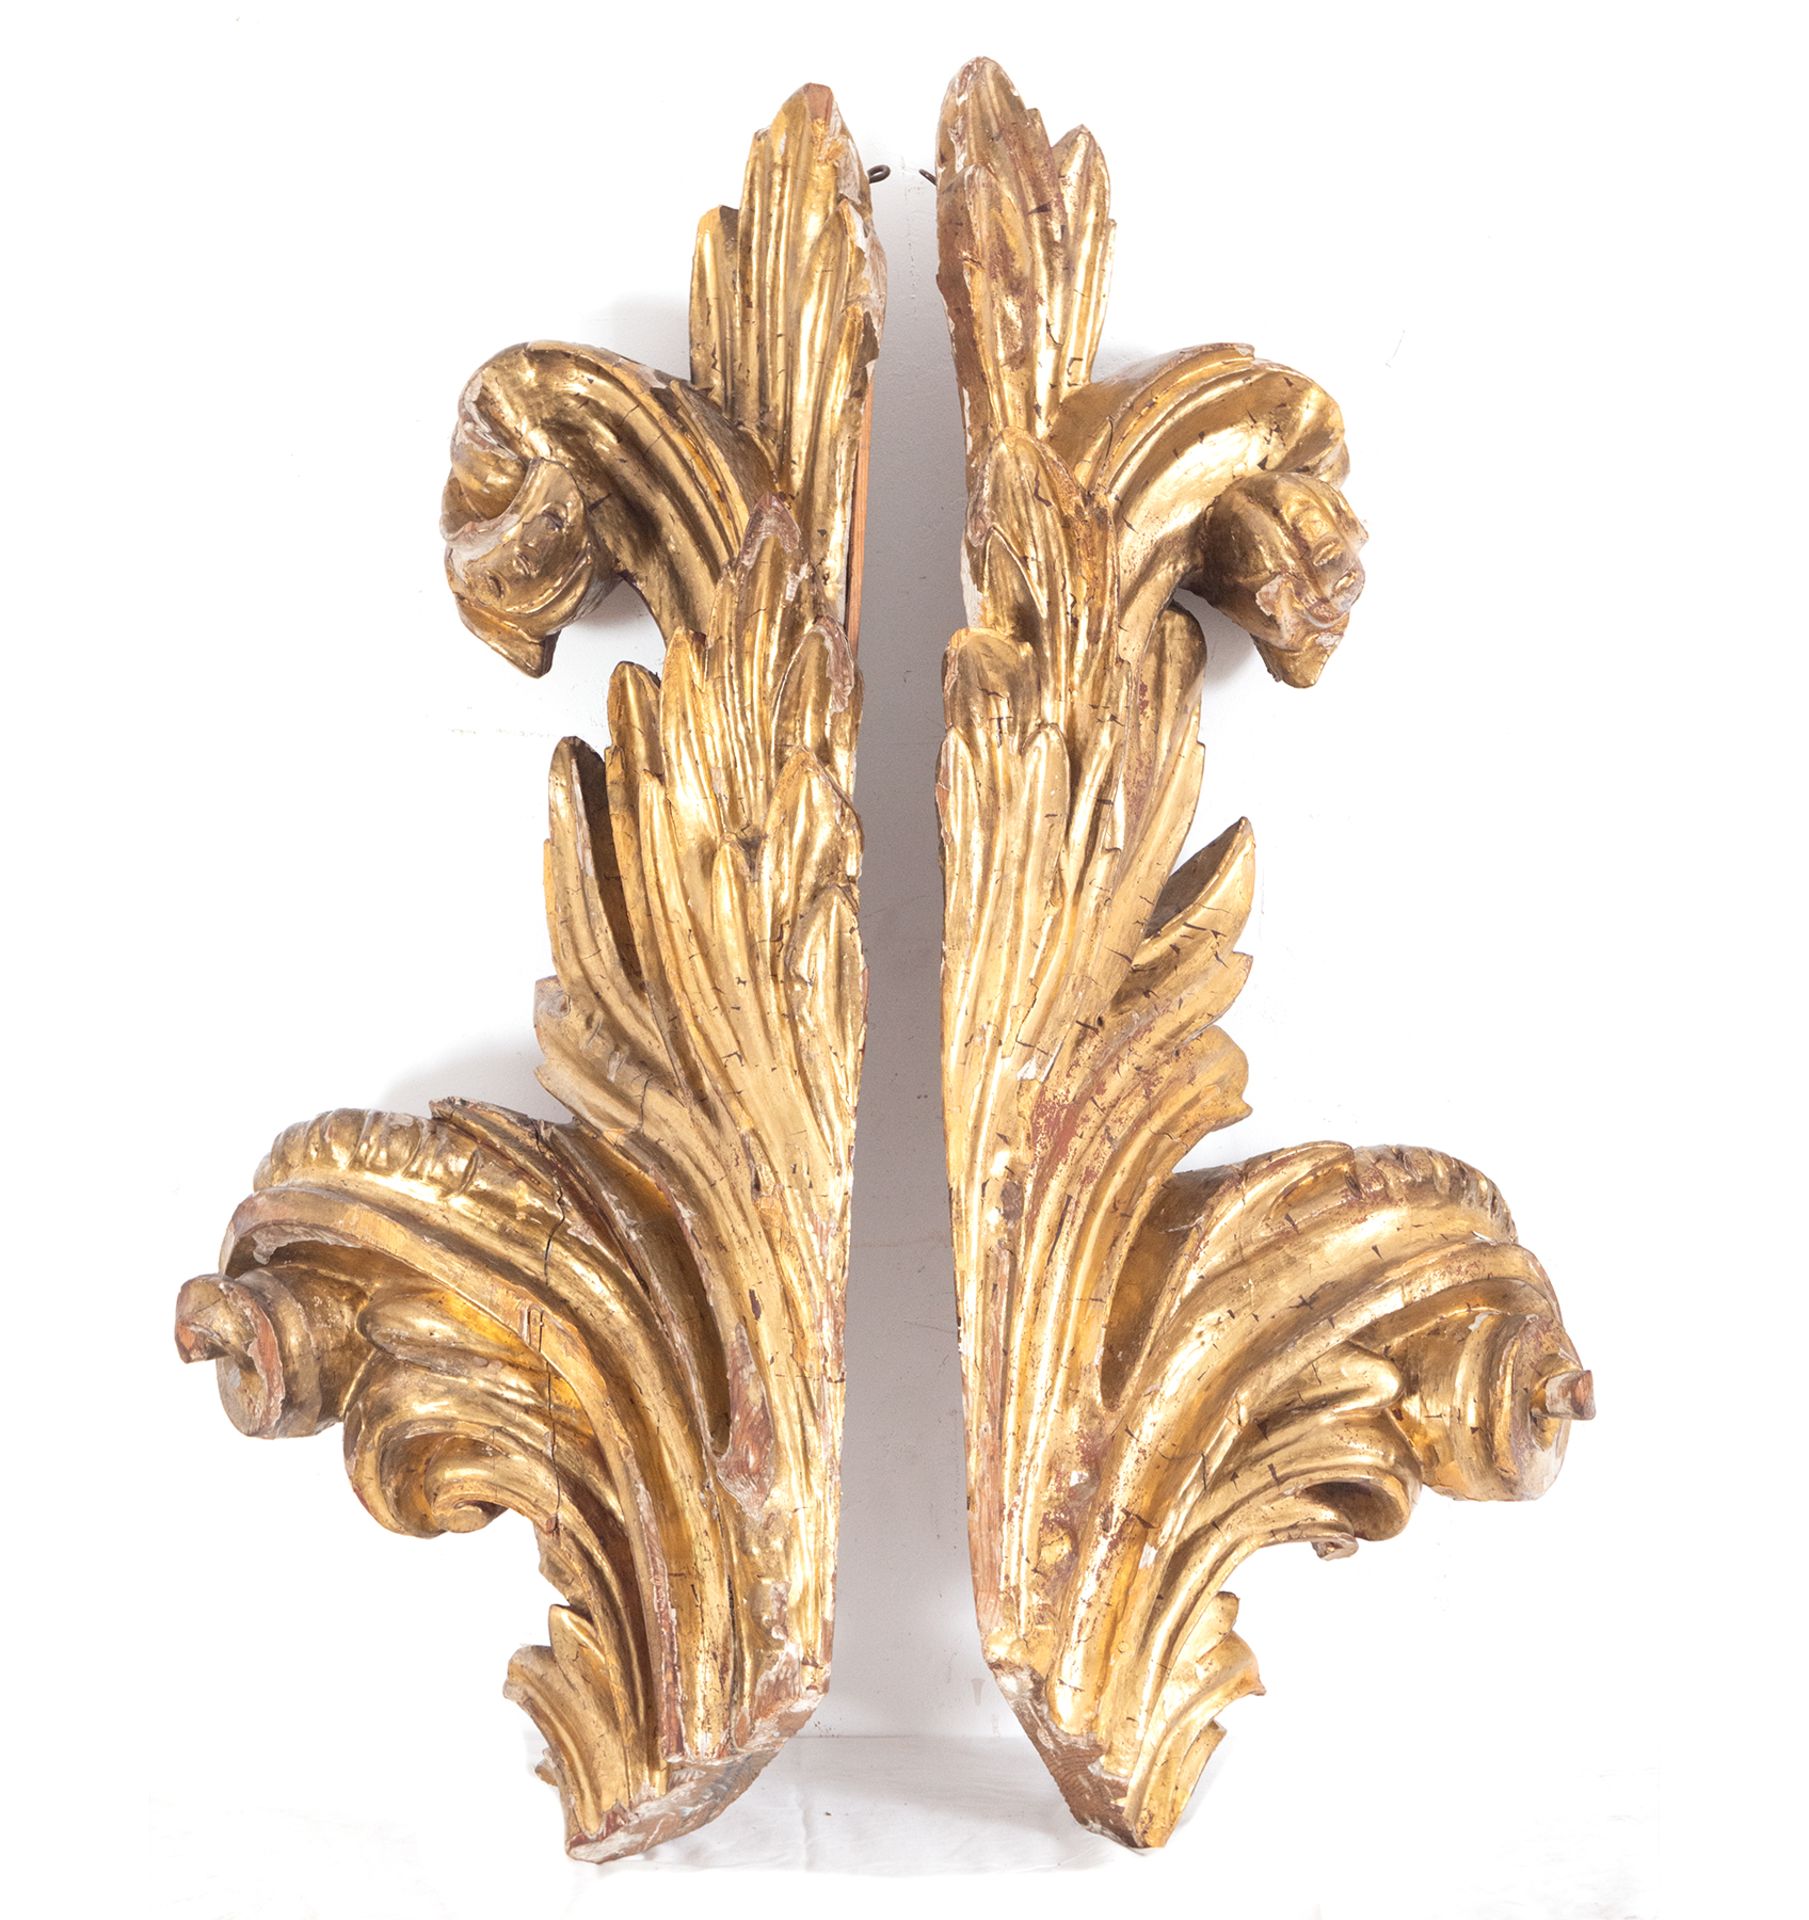 Pair of Large Auctions in gilded wood, 18th century